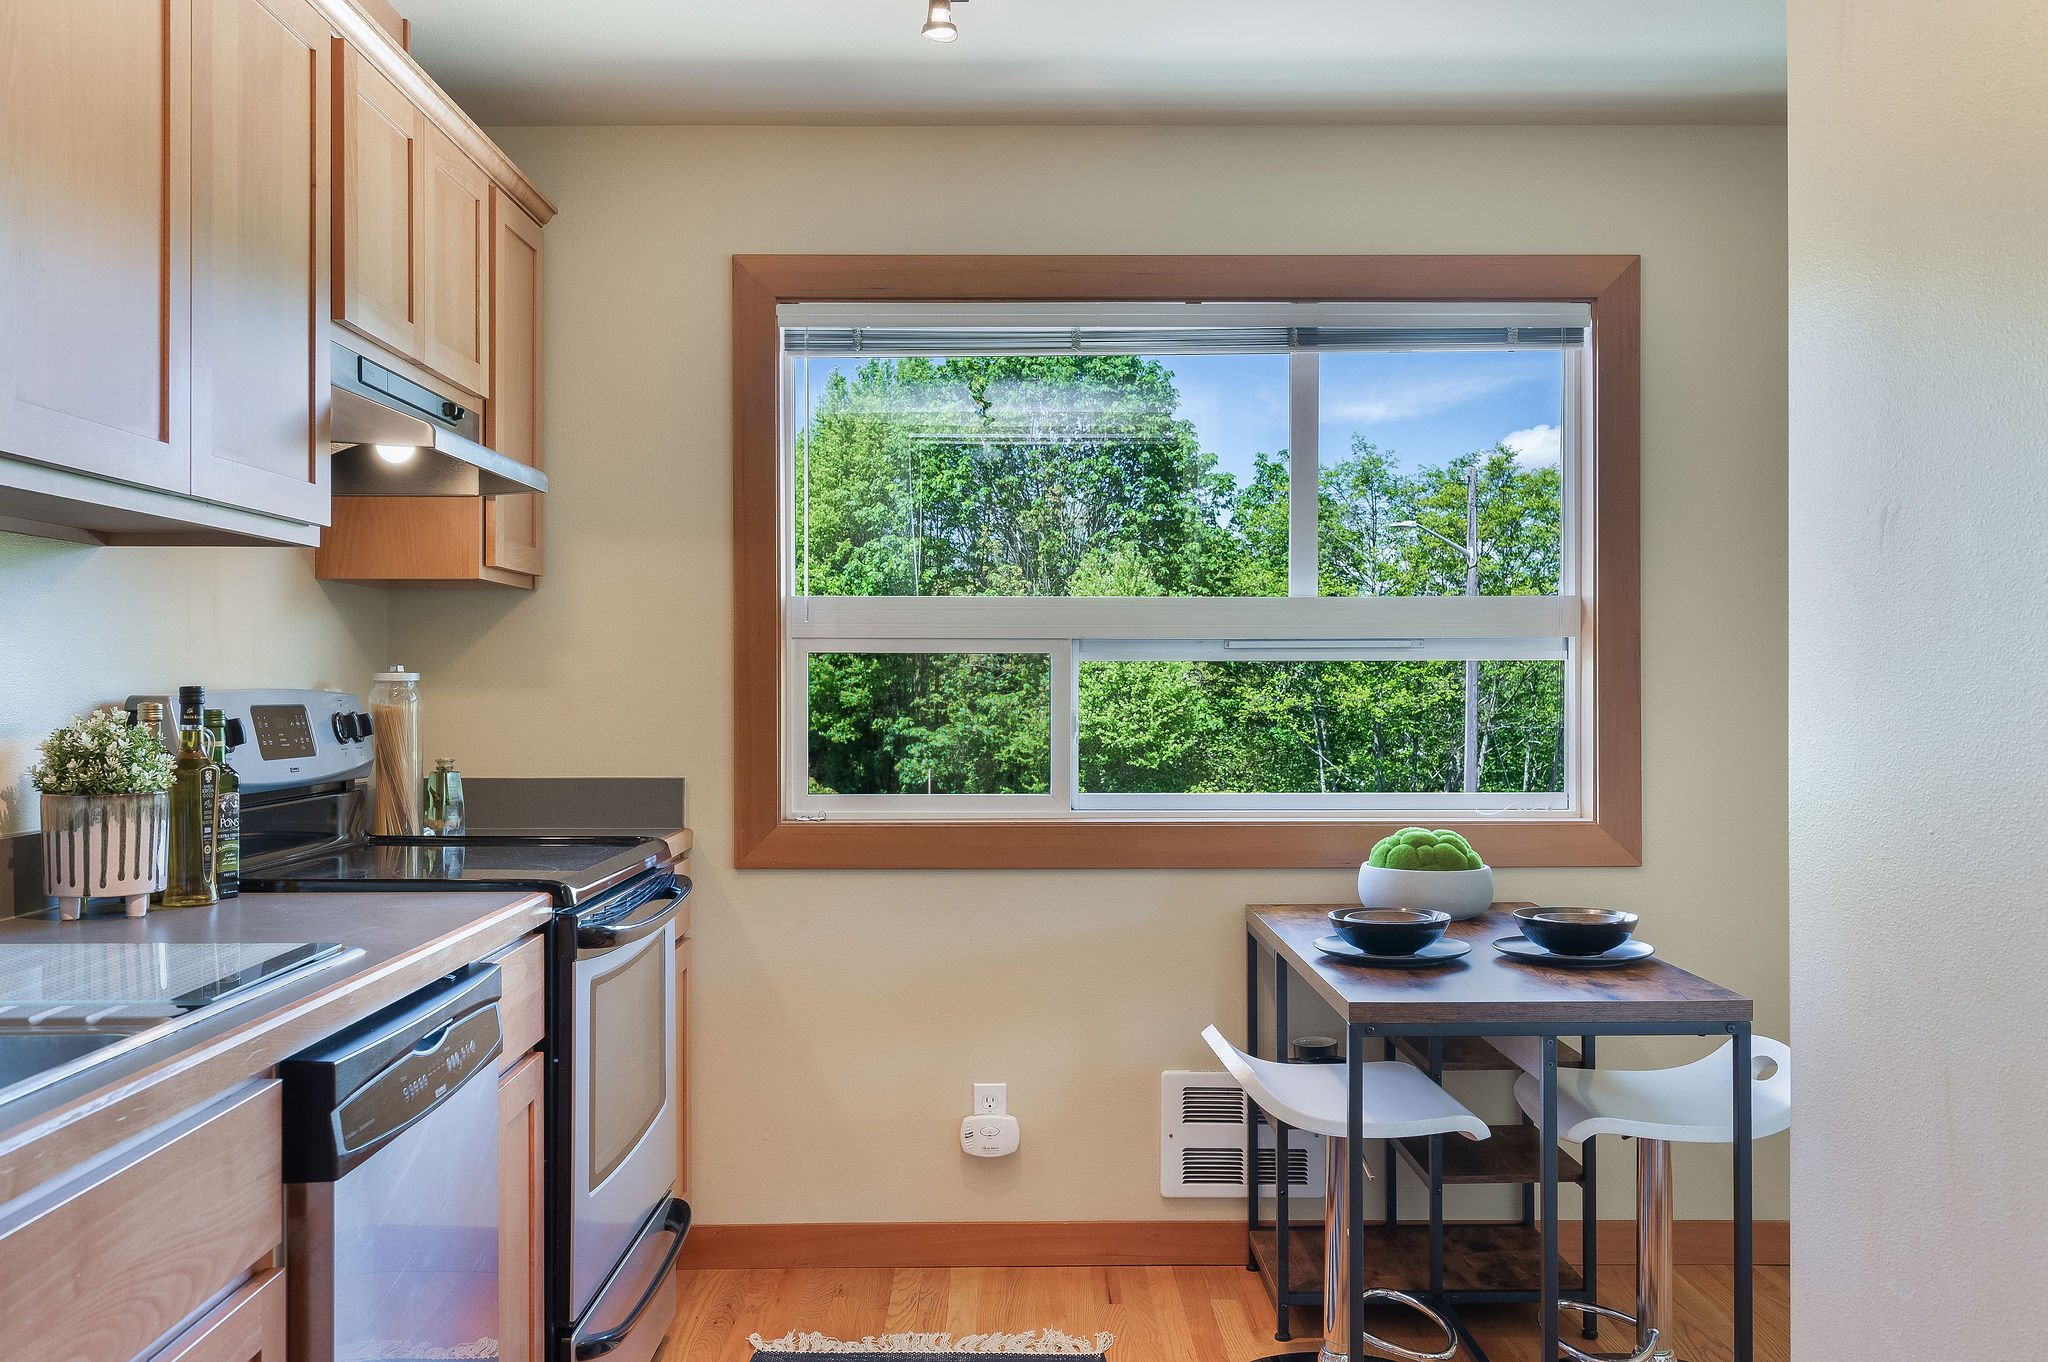  Image description: interior of studio kitchen with window and small dining table 